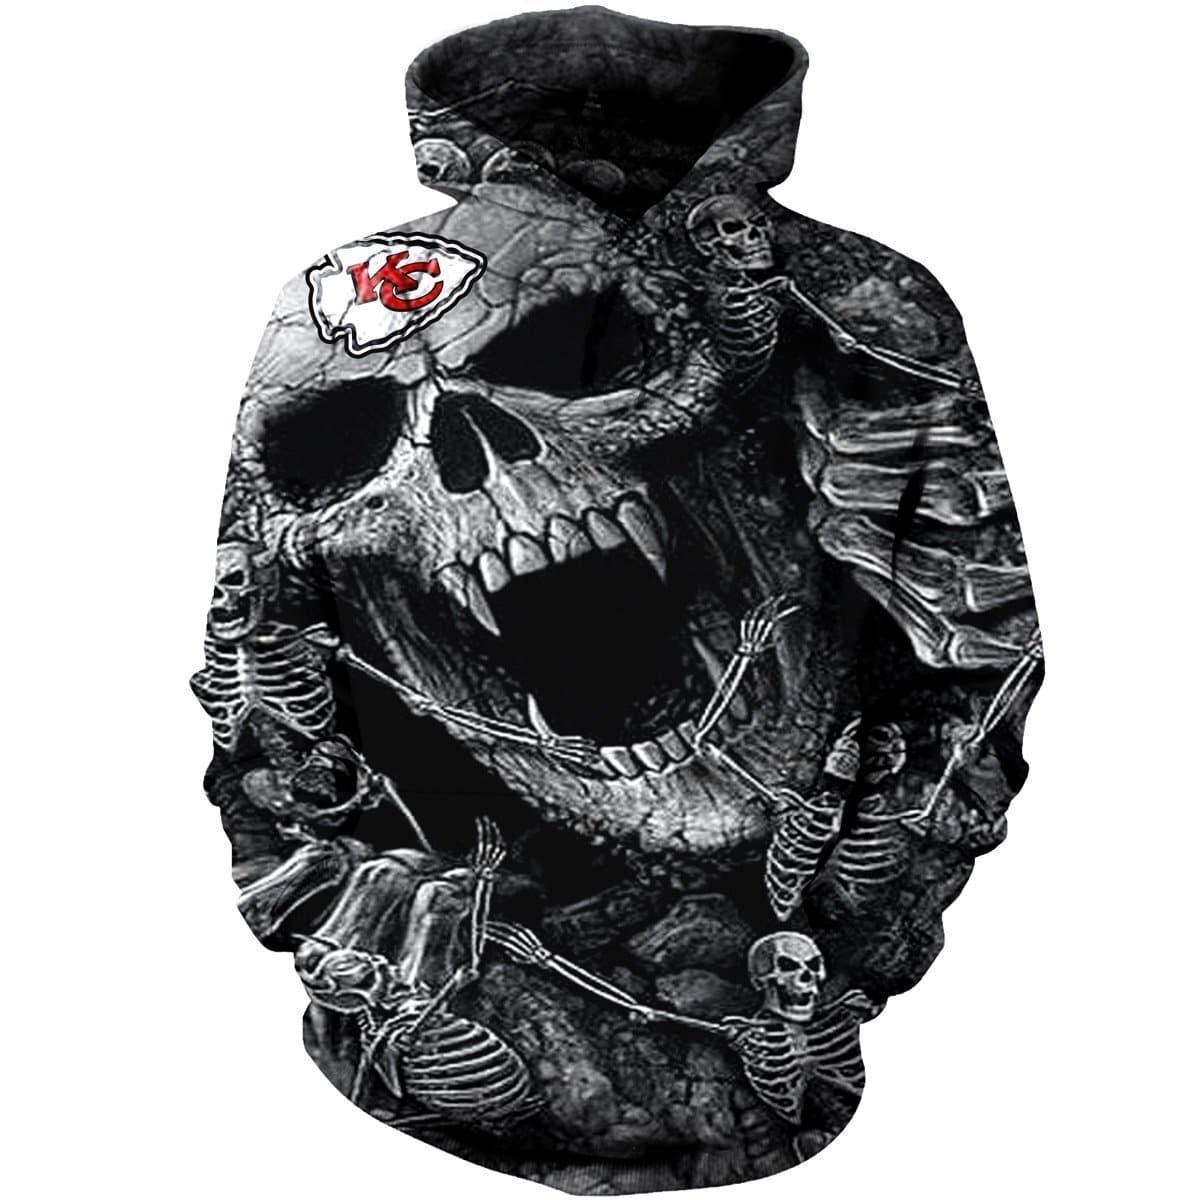 kansas city chiefs limited edition all over print hoodie zip hoodie size s 5xl gts002580 fl1ds